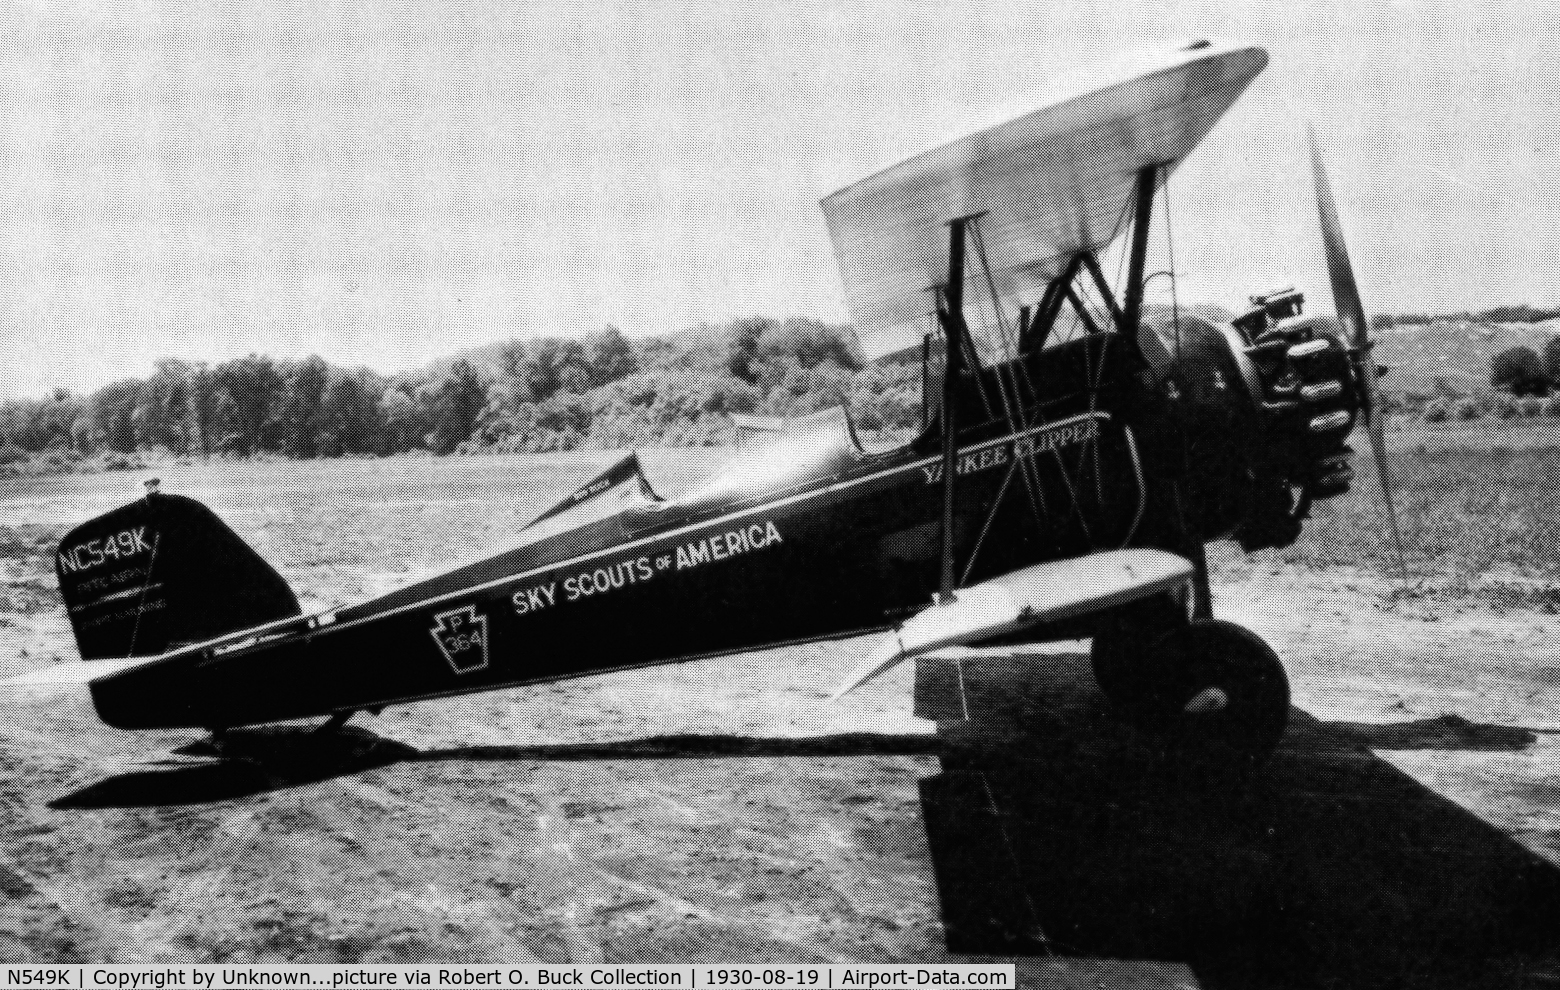 N549K, 1929 Pitcairn PA-6 Super Mailwing C/N 49, Pitcairn PA-6, N549K, at Armonk, New York, not long after purchased by Robert N. 